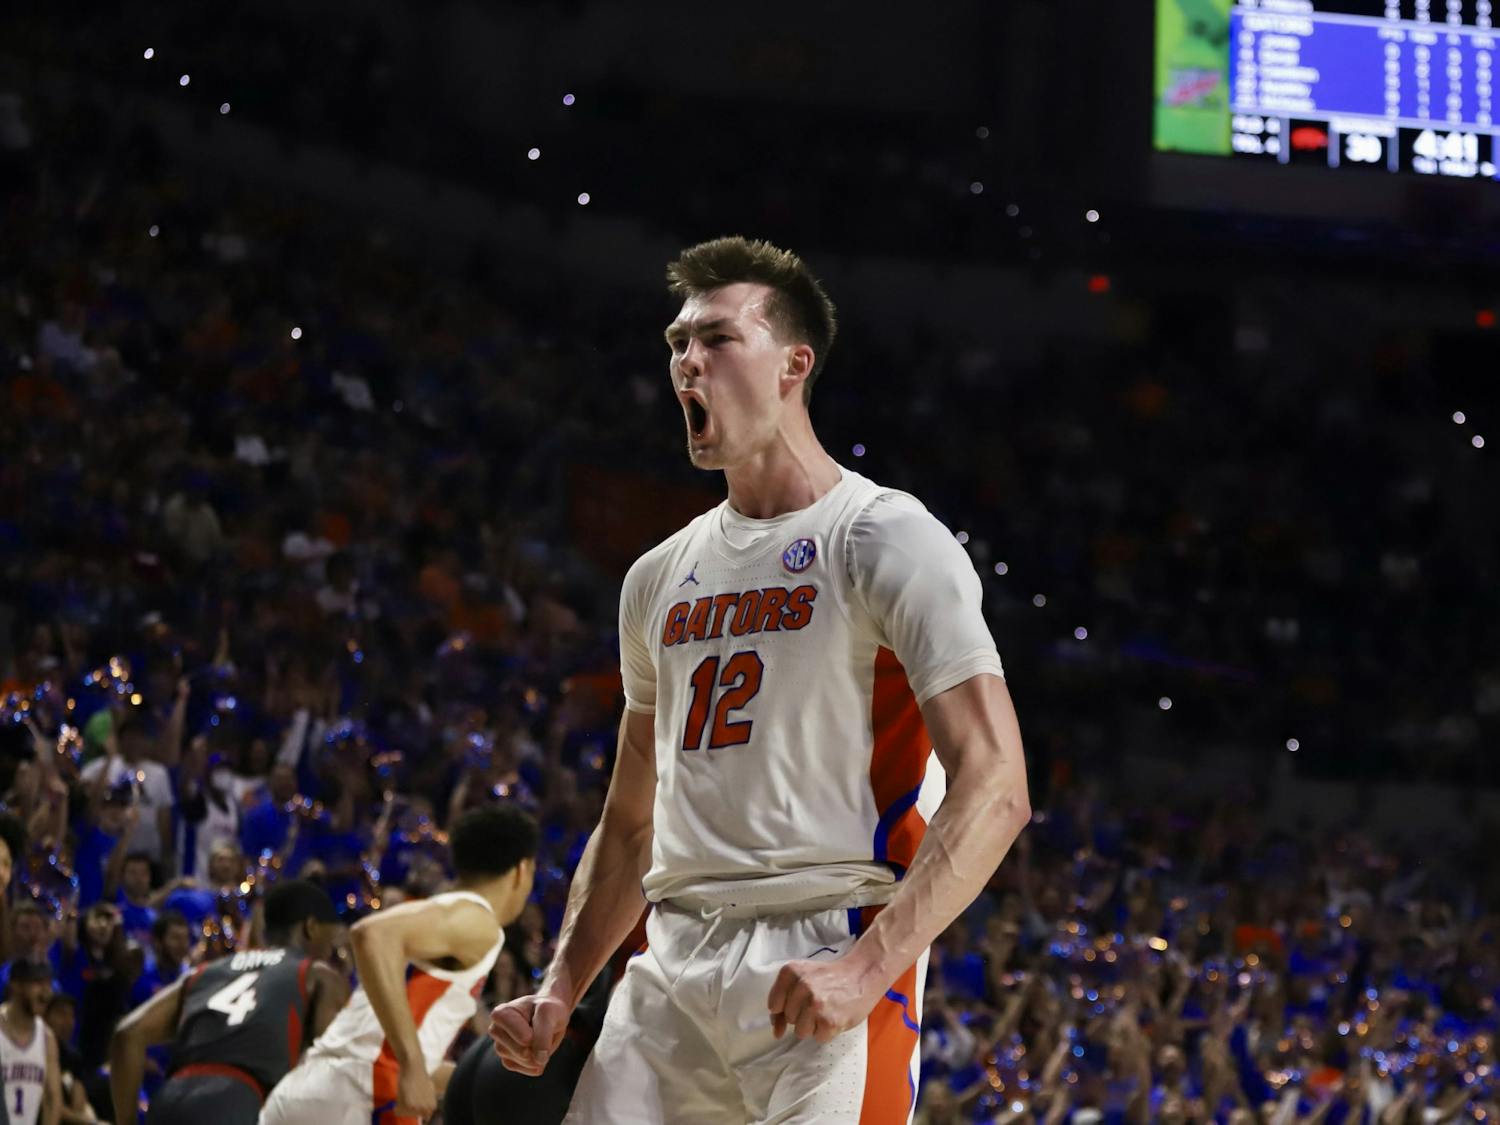 Colin Castleton has elected to use his fifth year of eligibility to play one more season in Gainesville. 